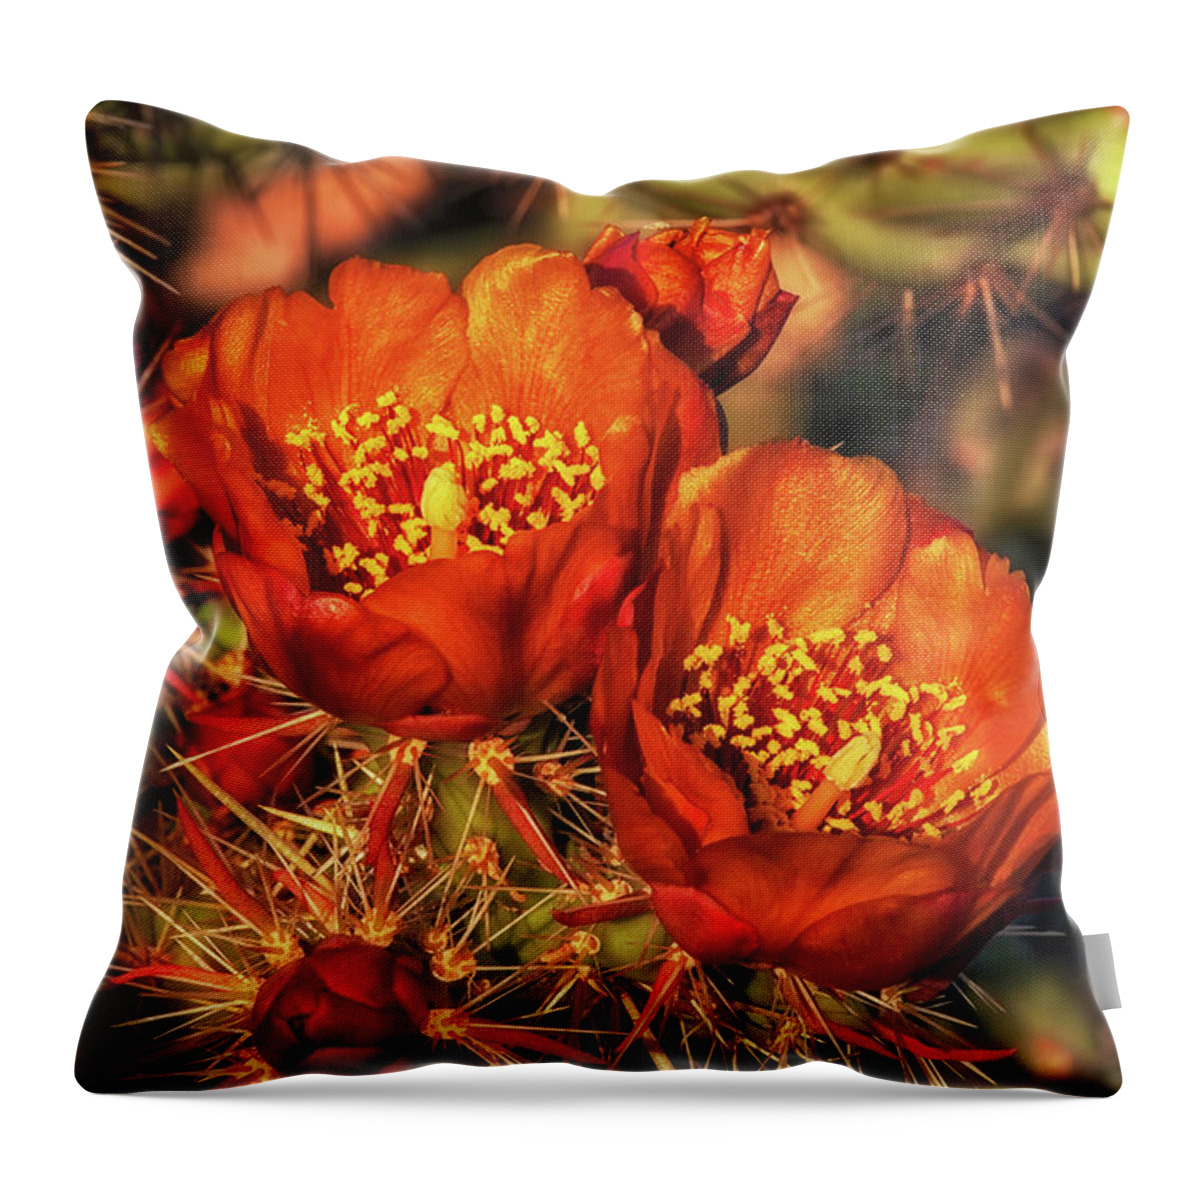 Arizona Throw Pillow featuring the photograph Look But Don't Touch by Rick Furmanek